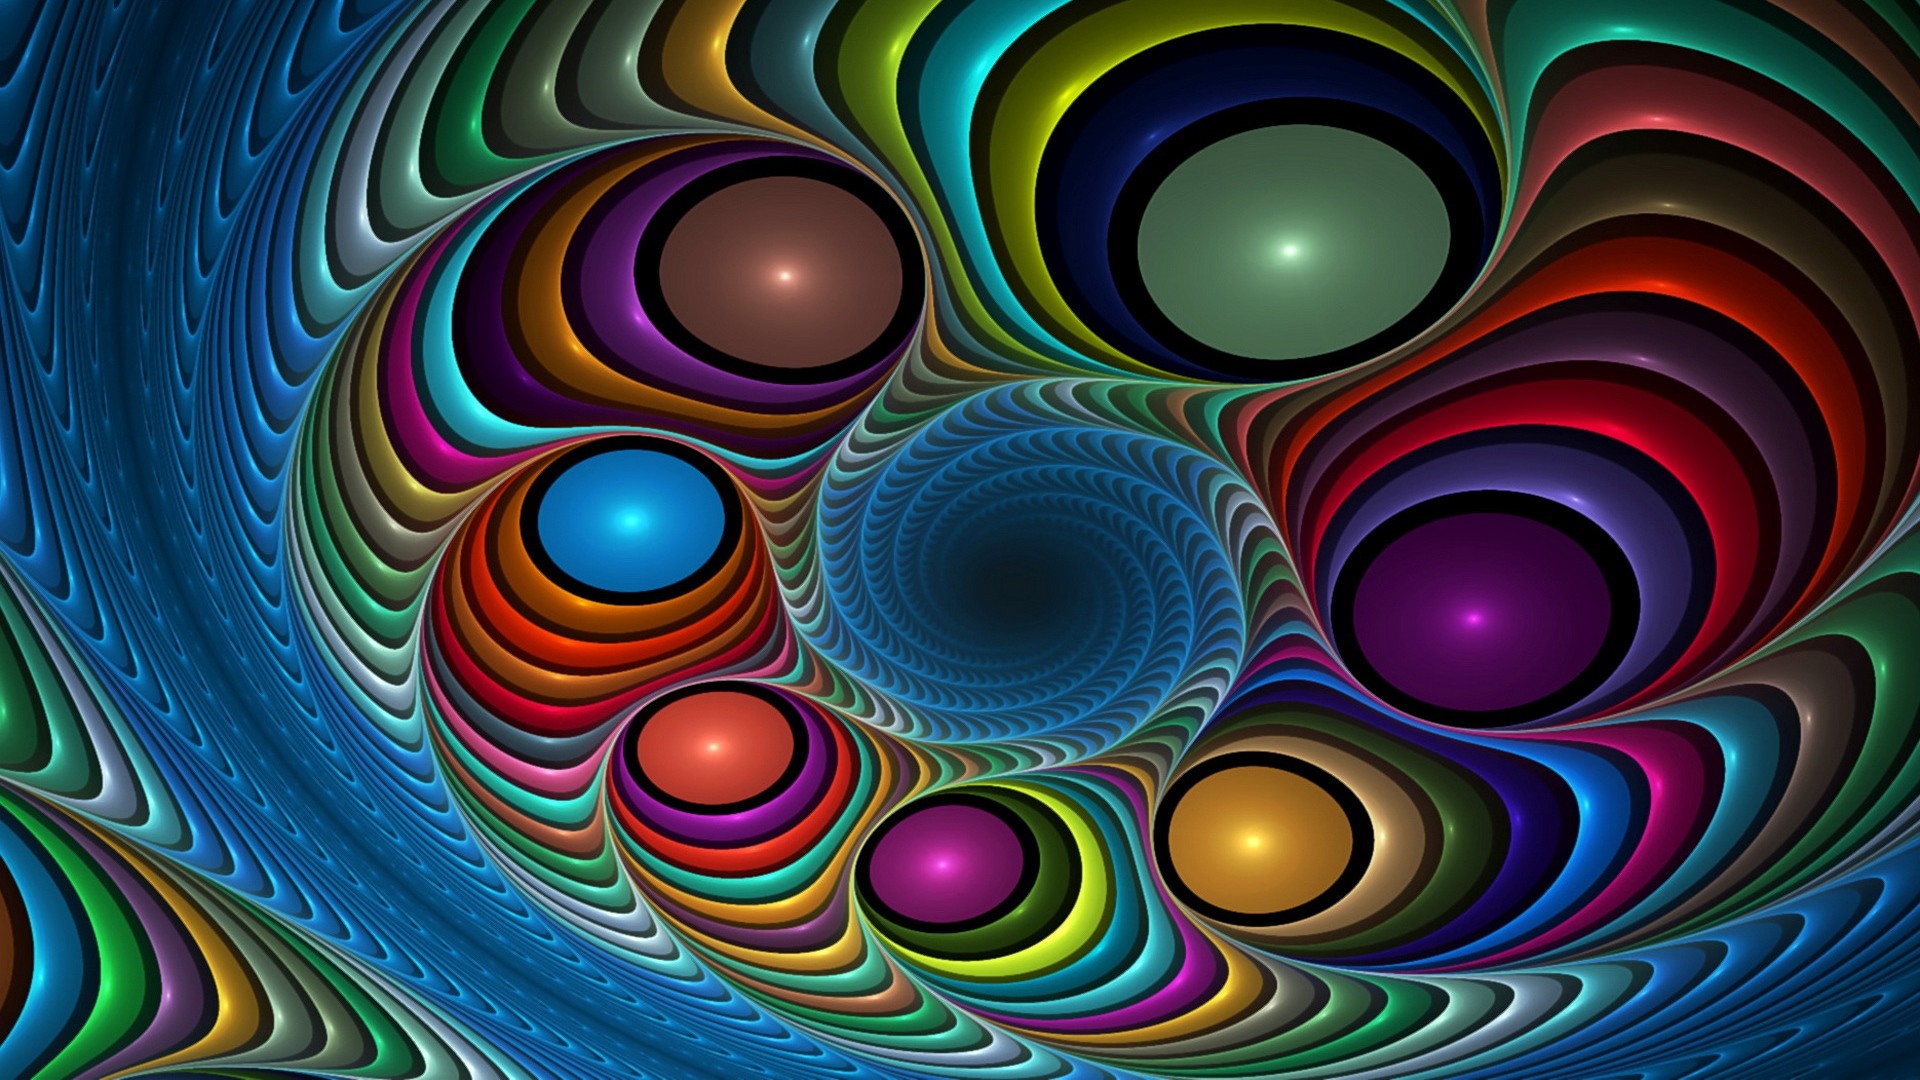 … Background Full HD 1080p. Wallpaper fractal, circles, spots,  colorful